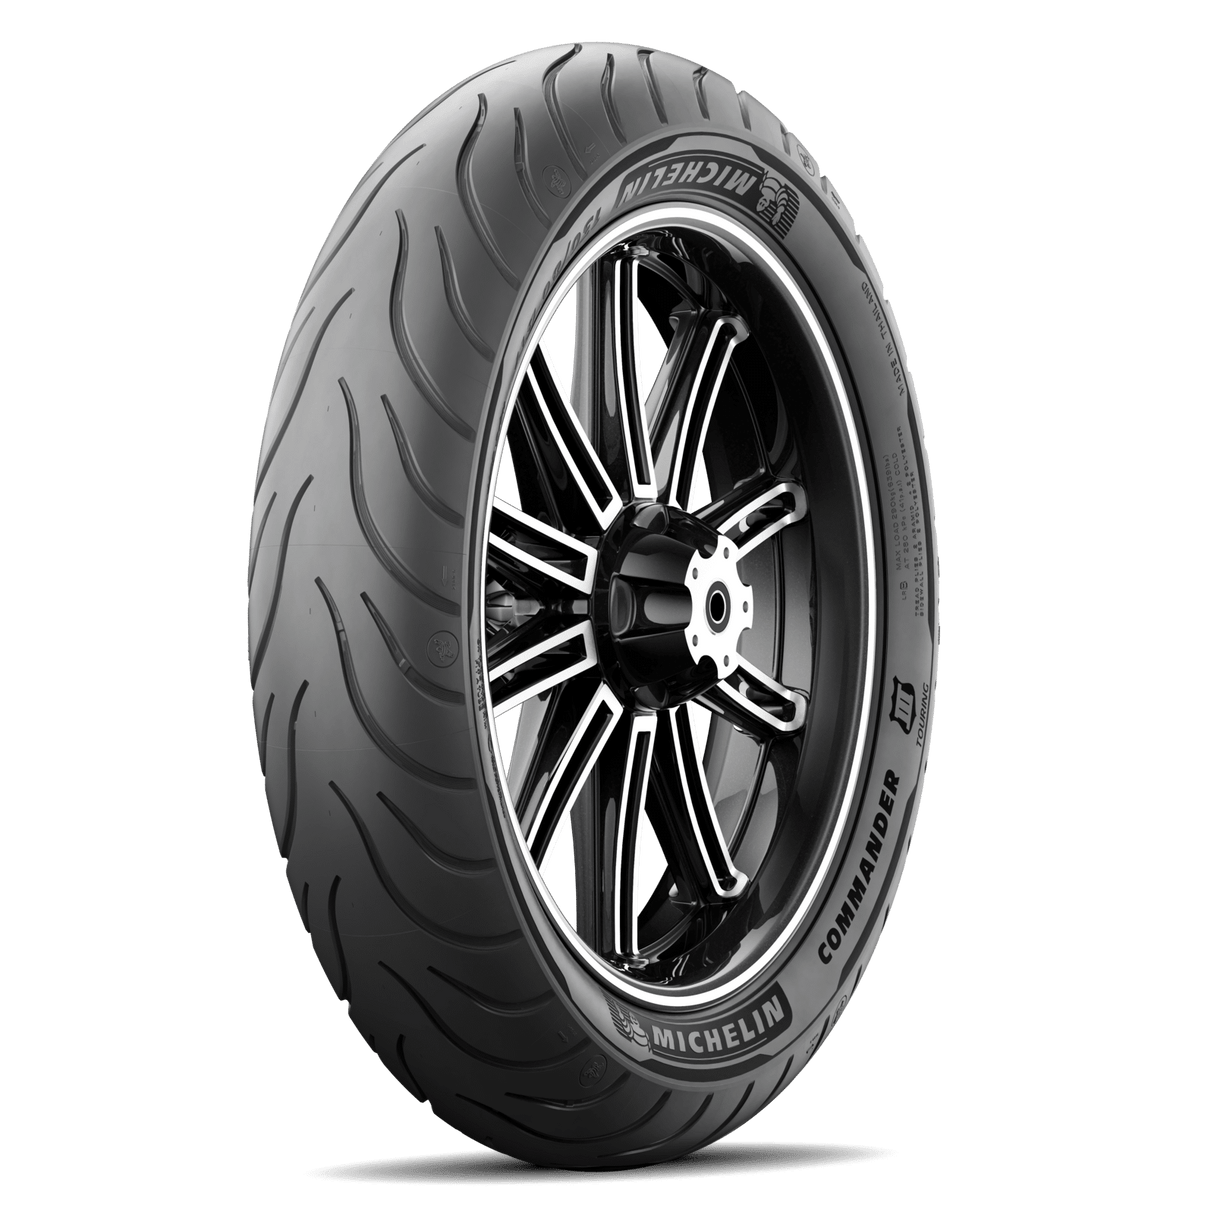 Michelin Commander III 130/80 B17 65H Front Touring Tyre